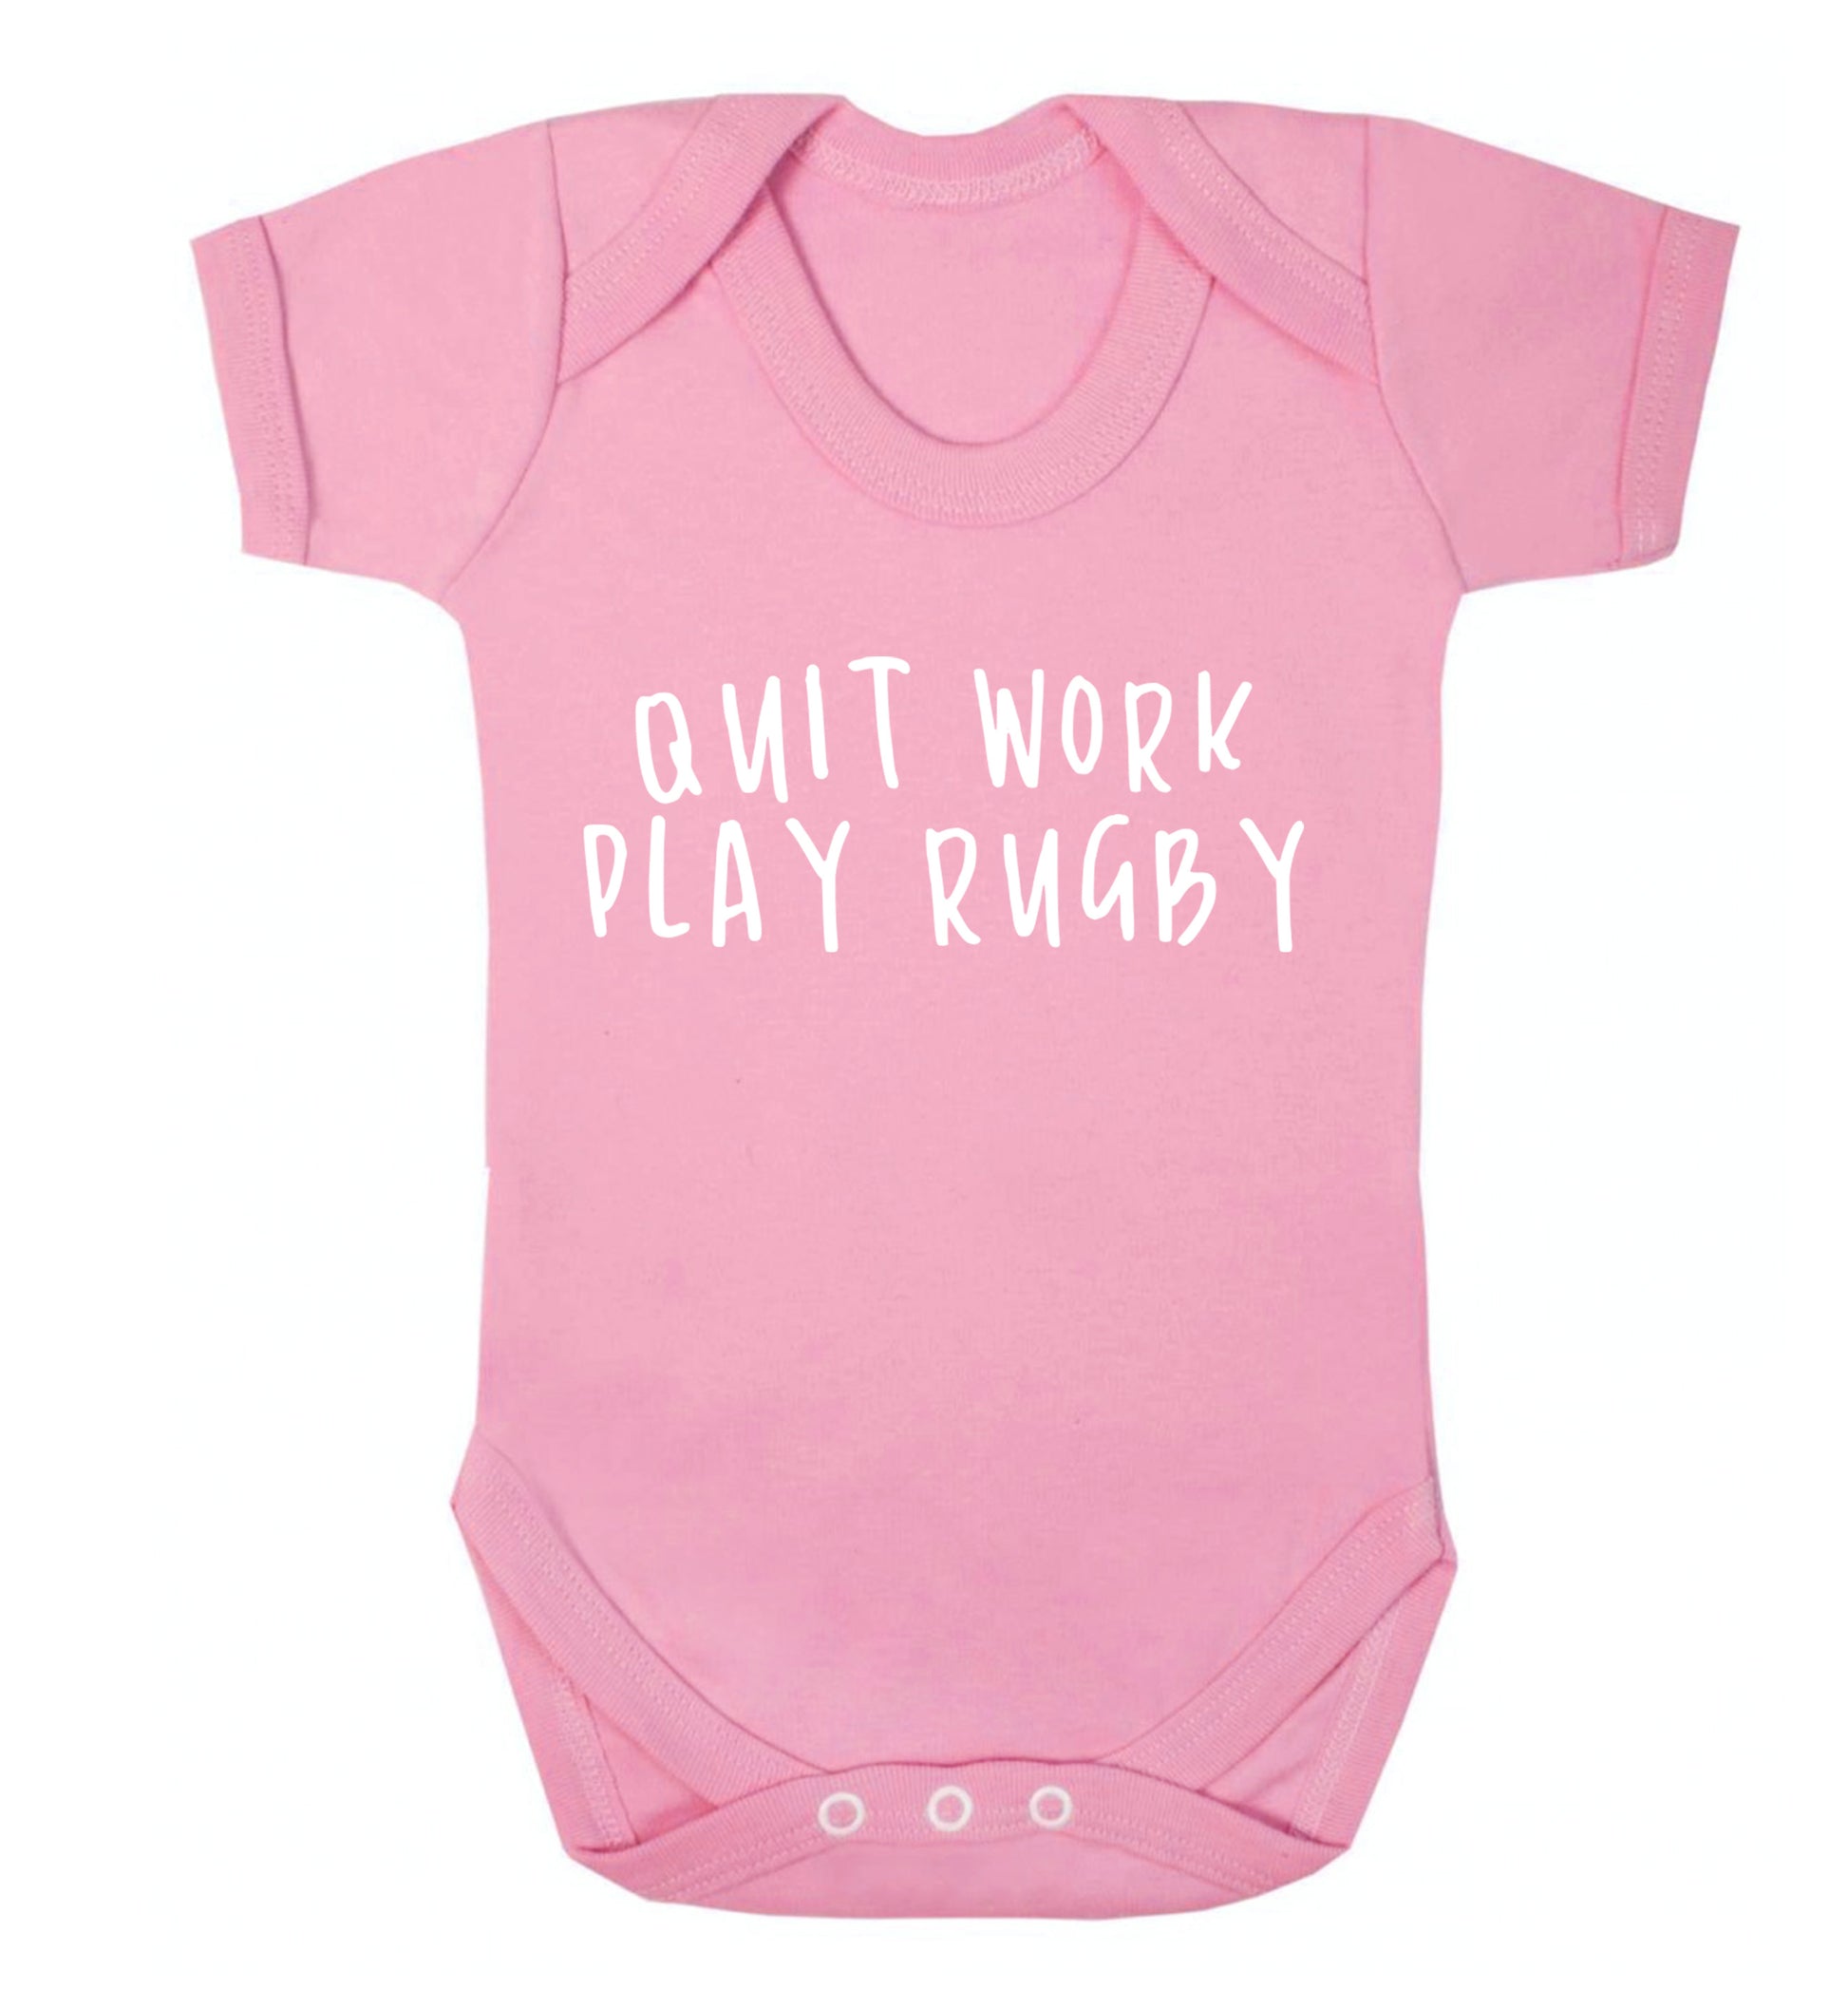 Quit work play rugby Baby Vest pale pink 18-24 months